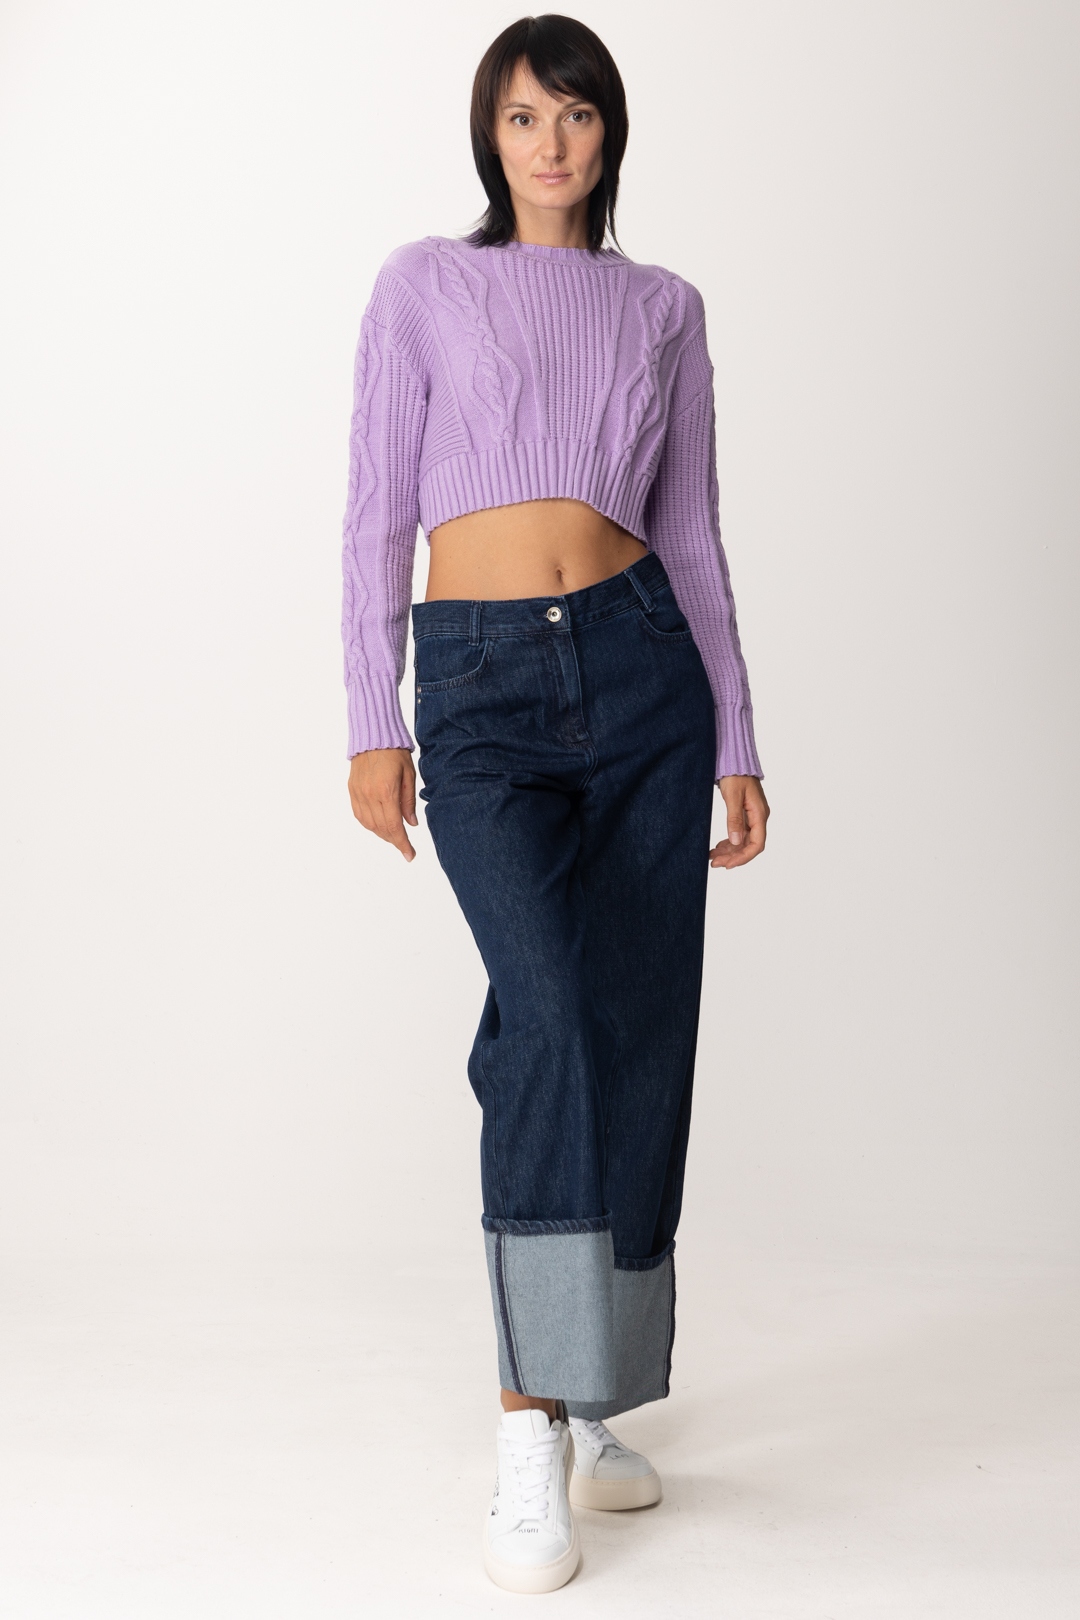 Preview: Patrizia Pepe Cropped sweater Mystical Lilac